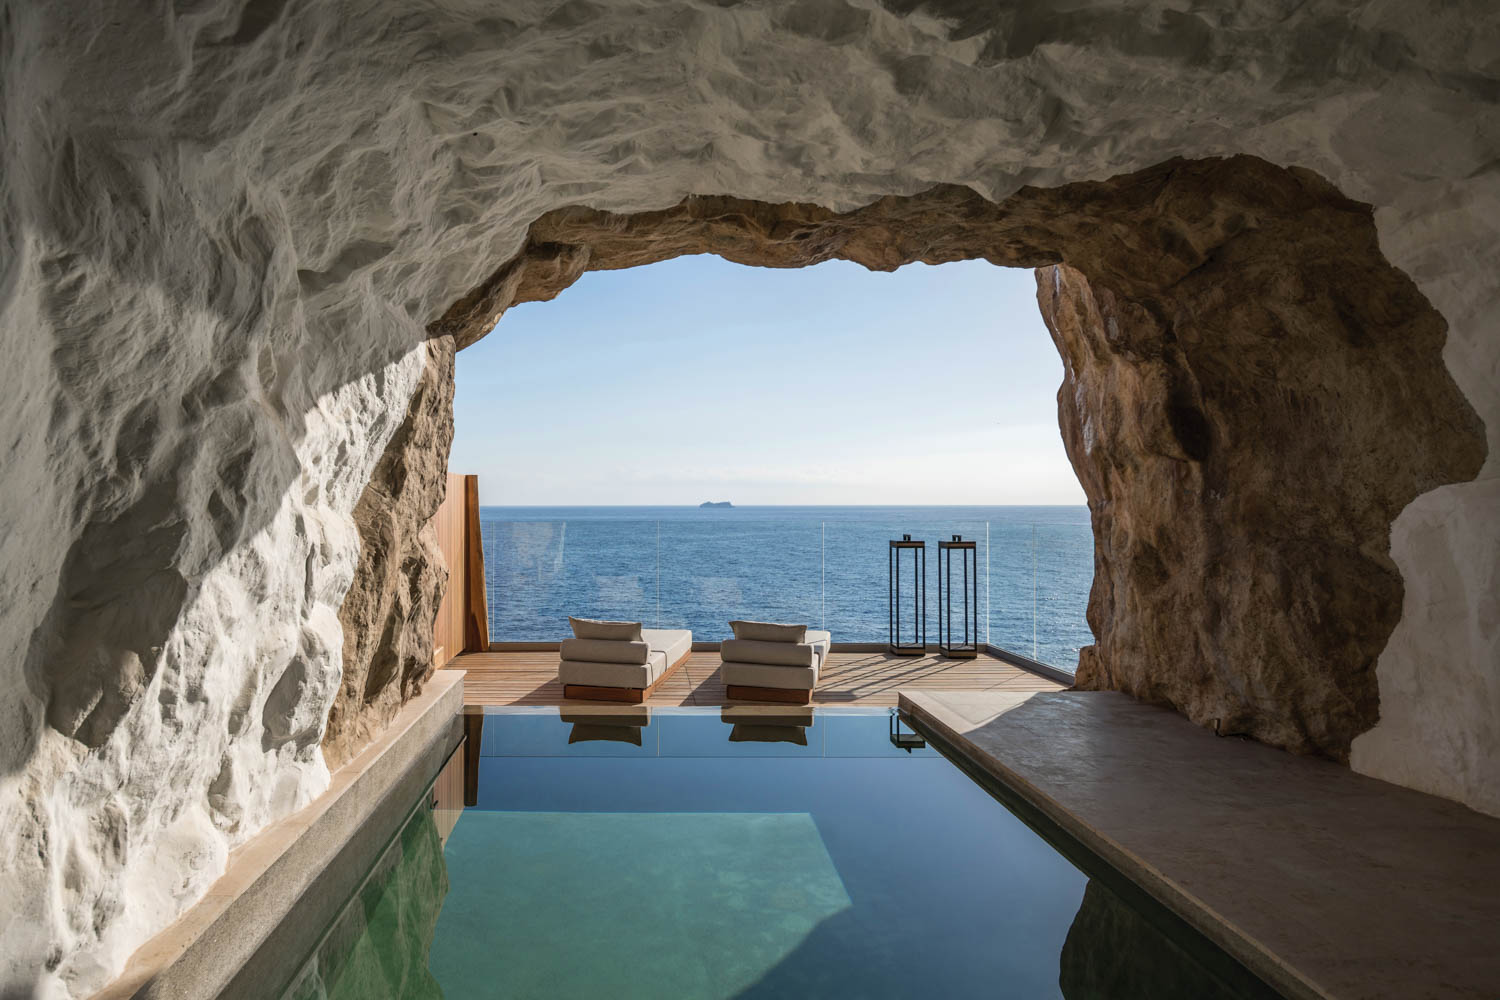 Luxury Wellness Hotel Acro Suites Fuses A Sense Of Place, Design, And Serenity